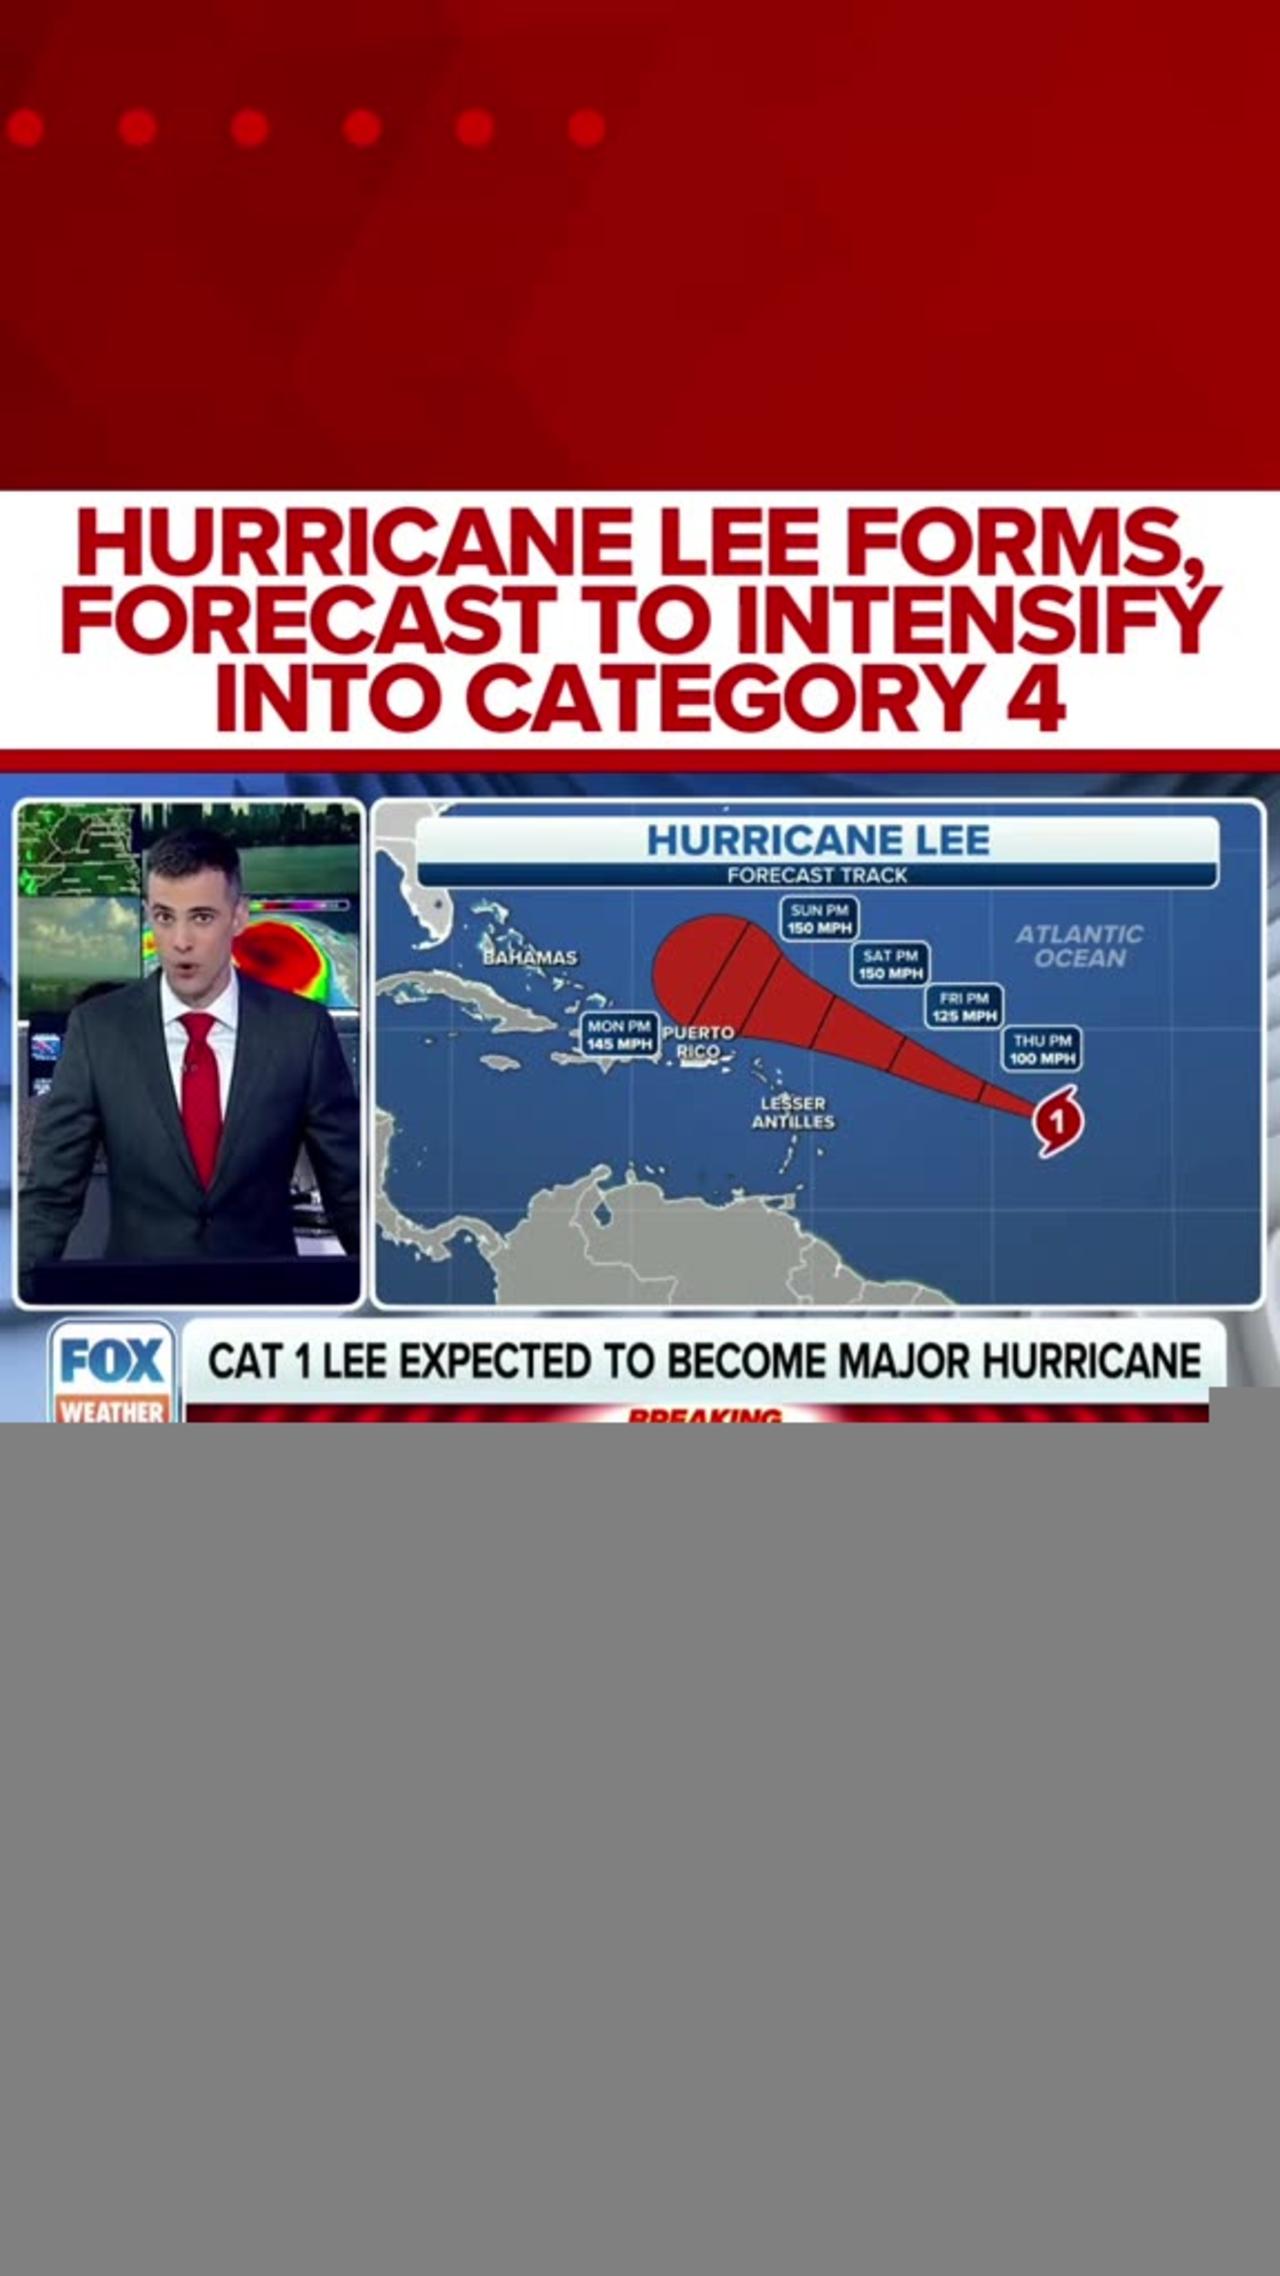 "Hurricane Lee Update: Category 4 Storm Intensification Imminent, Preparations Advised"